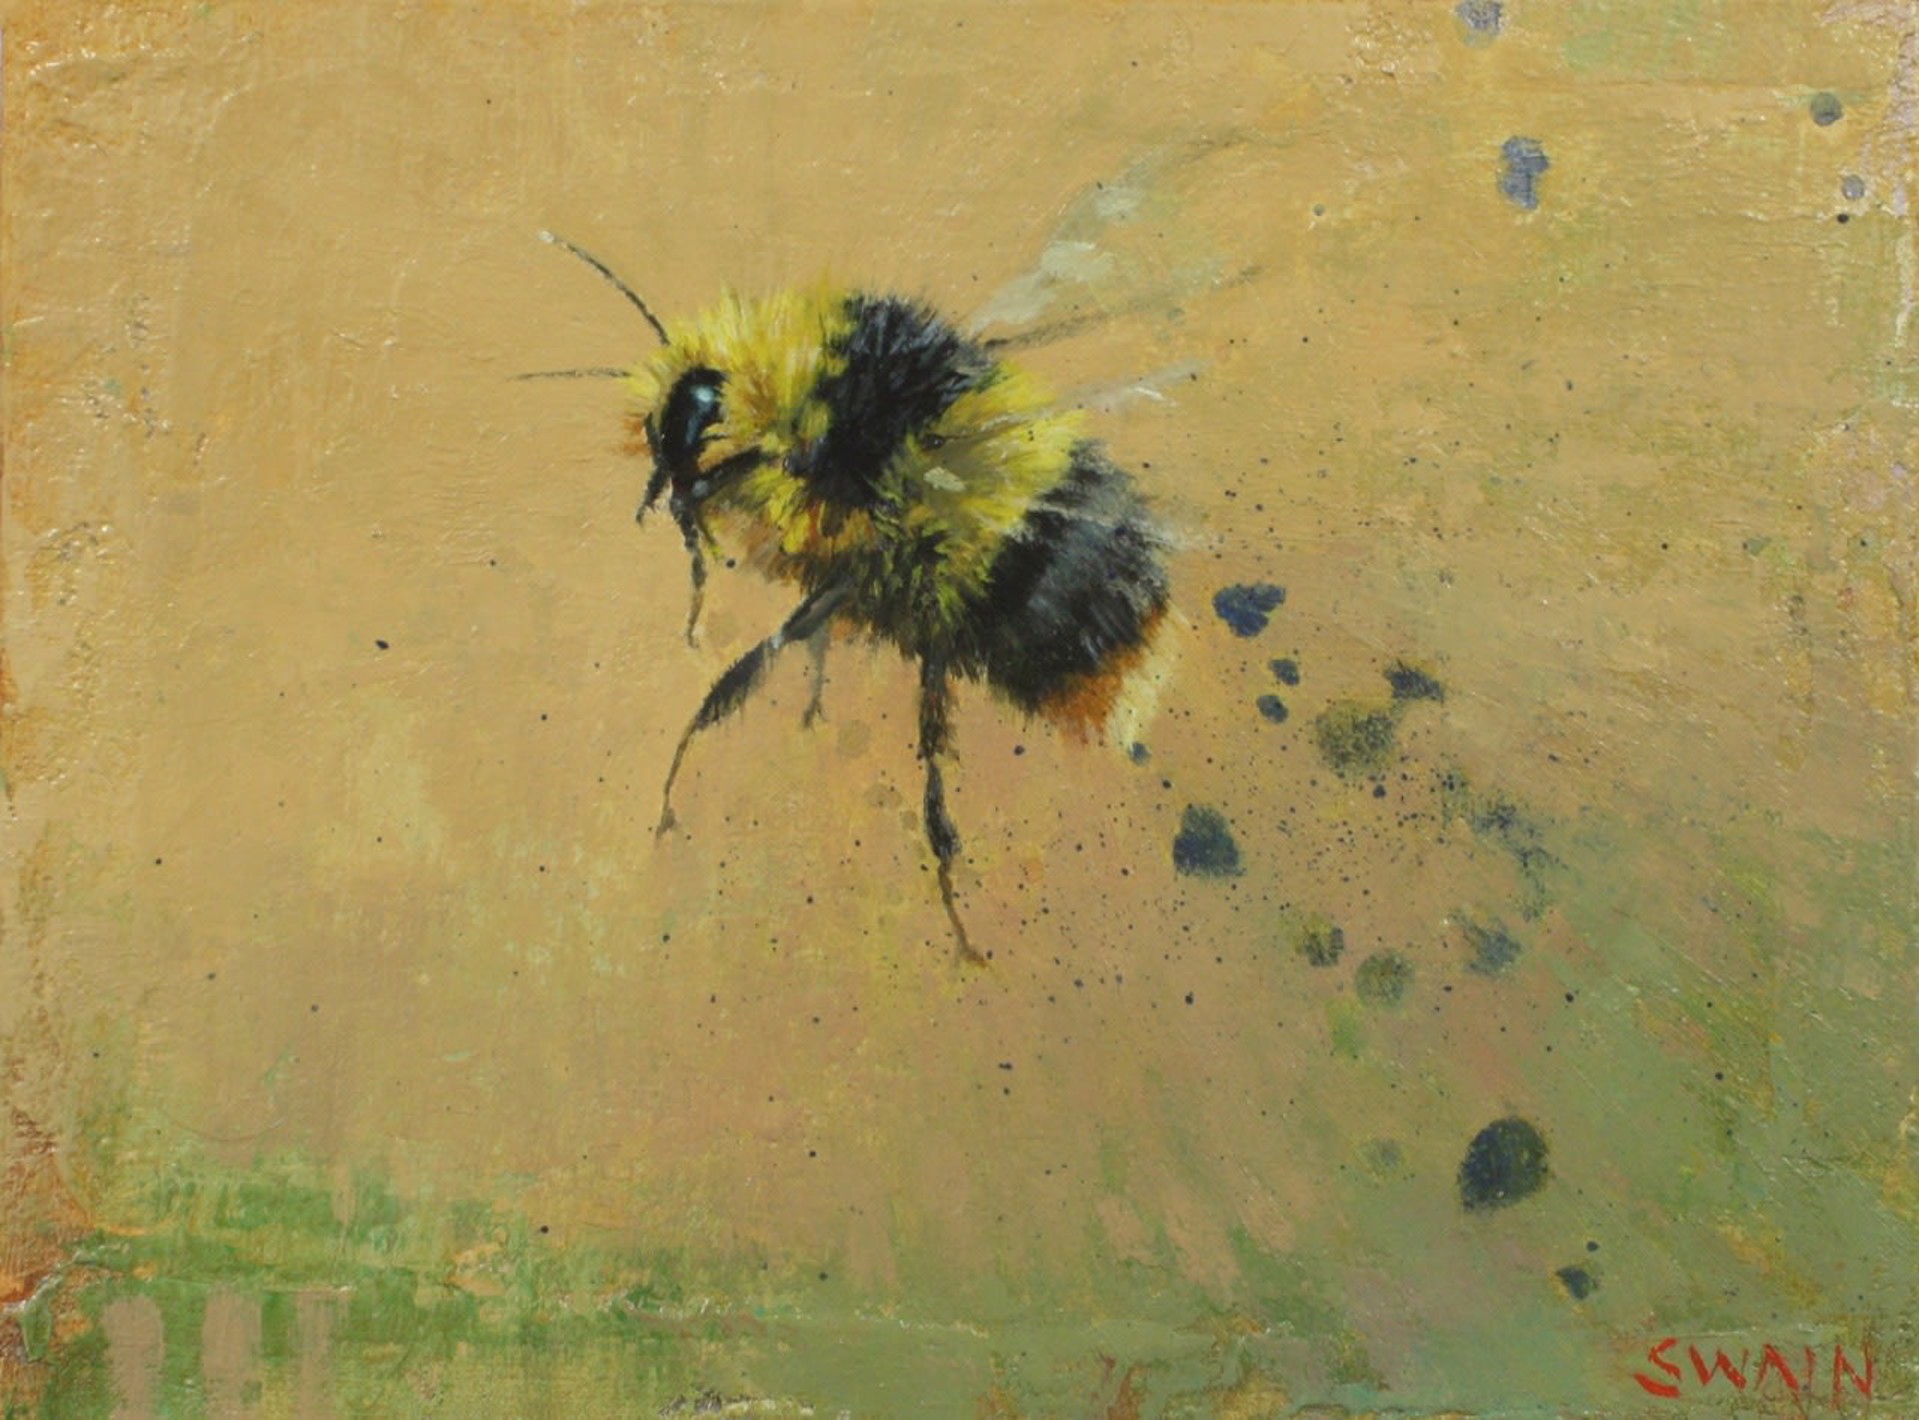 Busy Bee by Tyler Swain